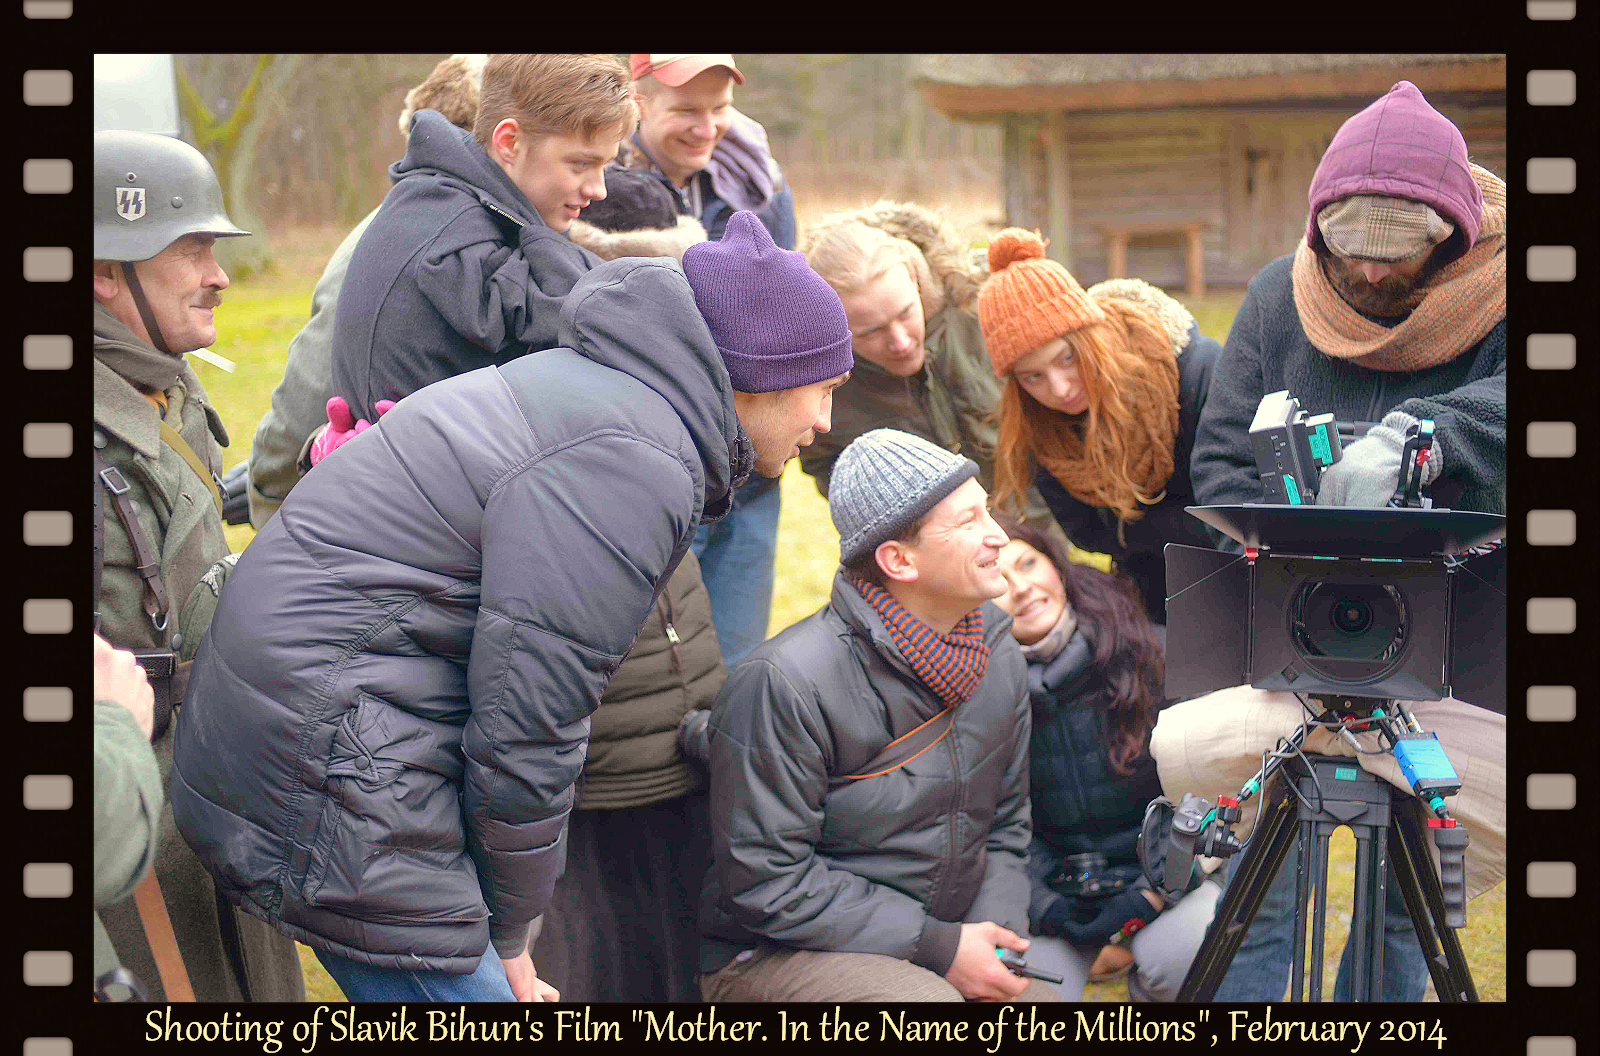 Slavik Bihun (in the middle) with the Crew during the shooting of the film 